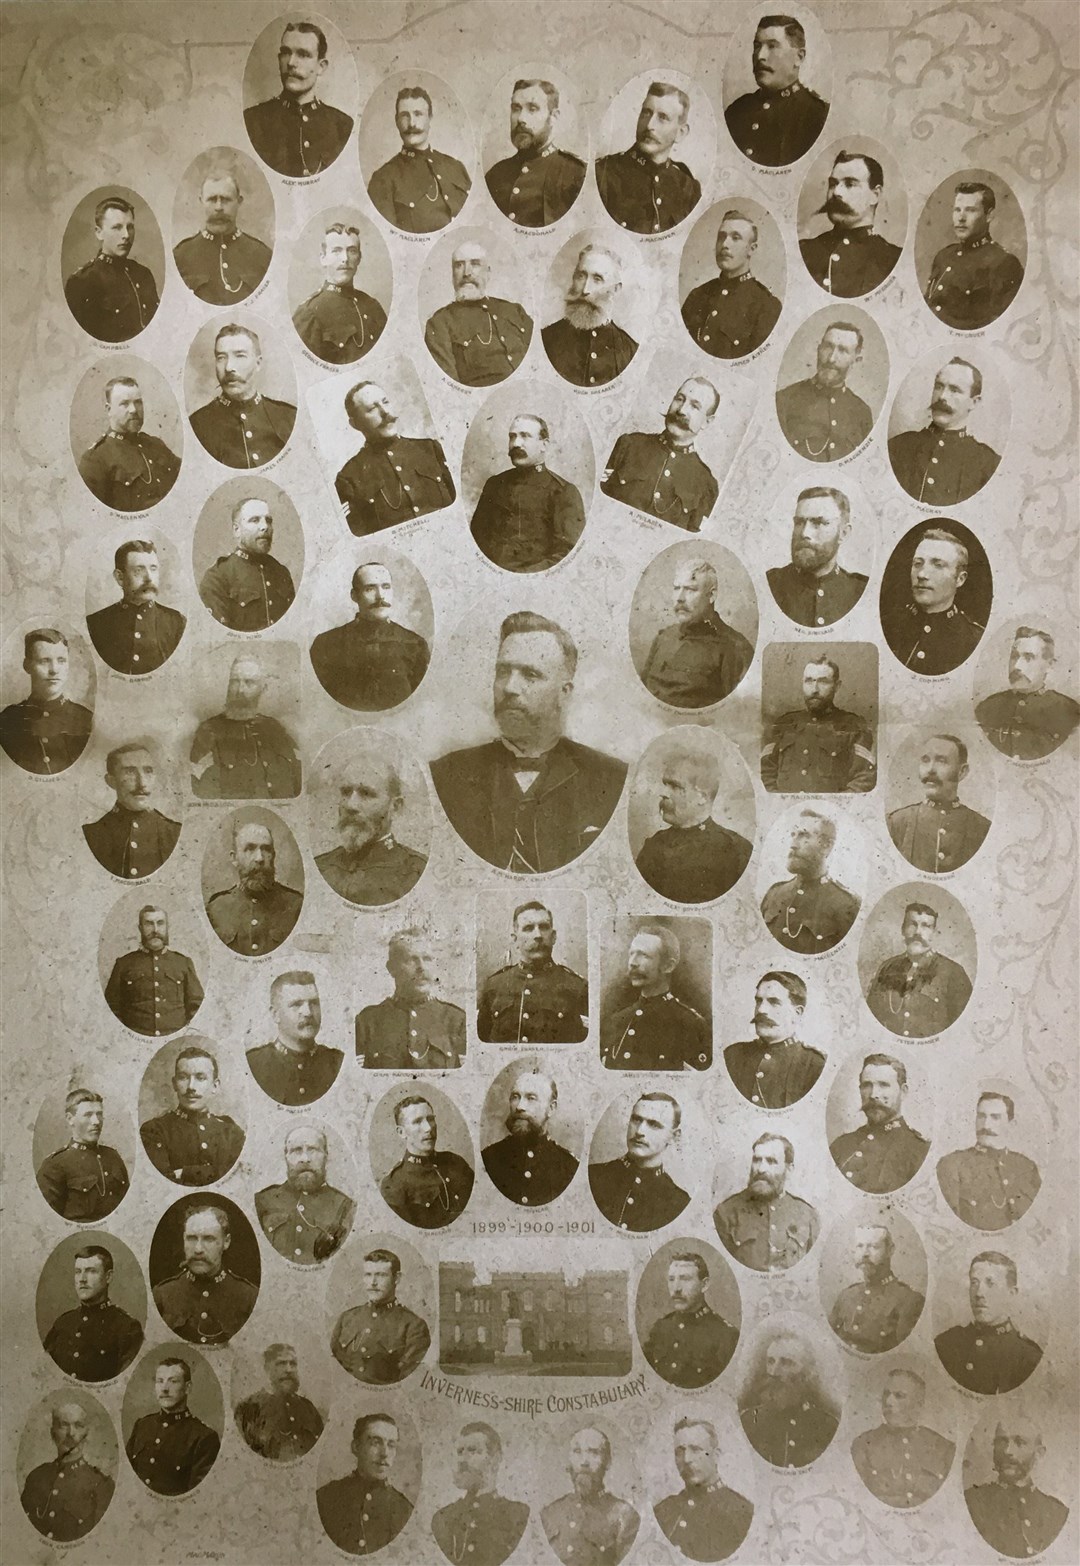 Members of Inverness-shire Constabulary, 1899-1901.